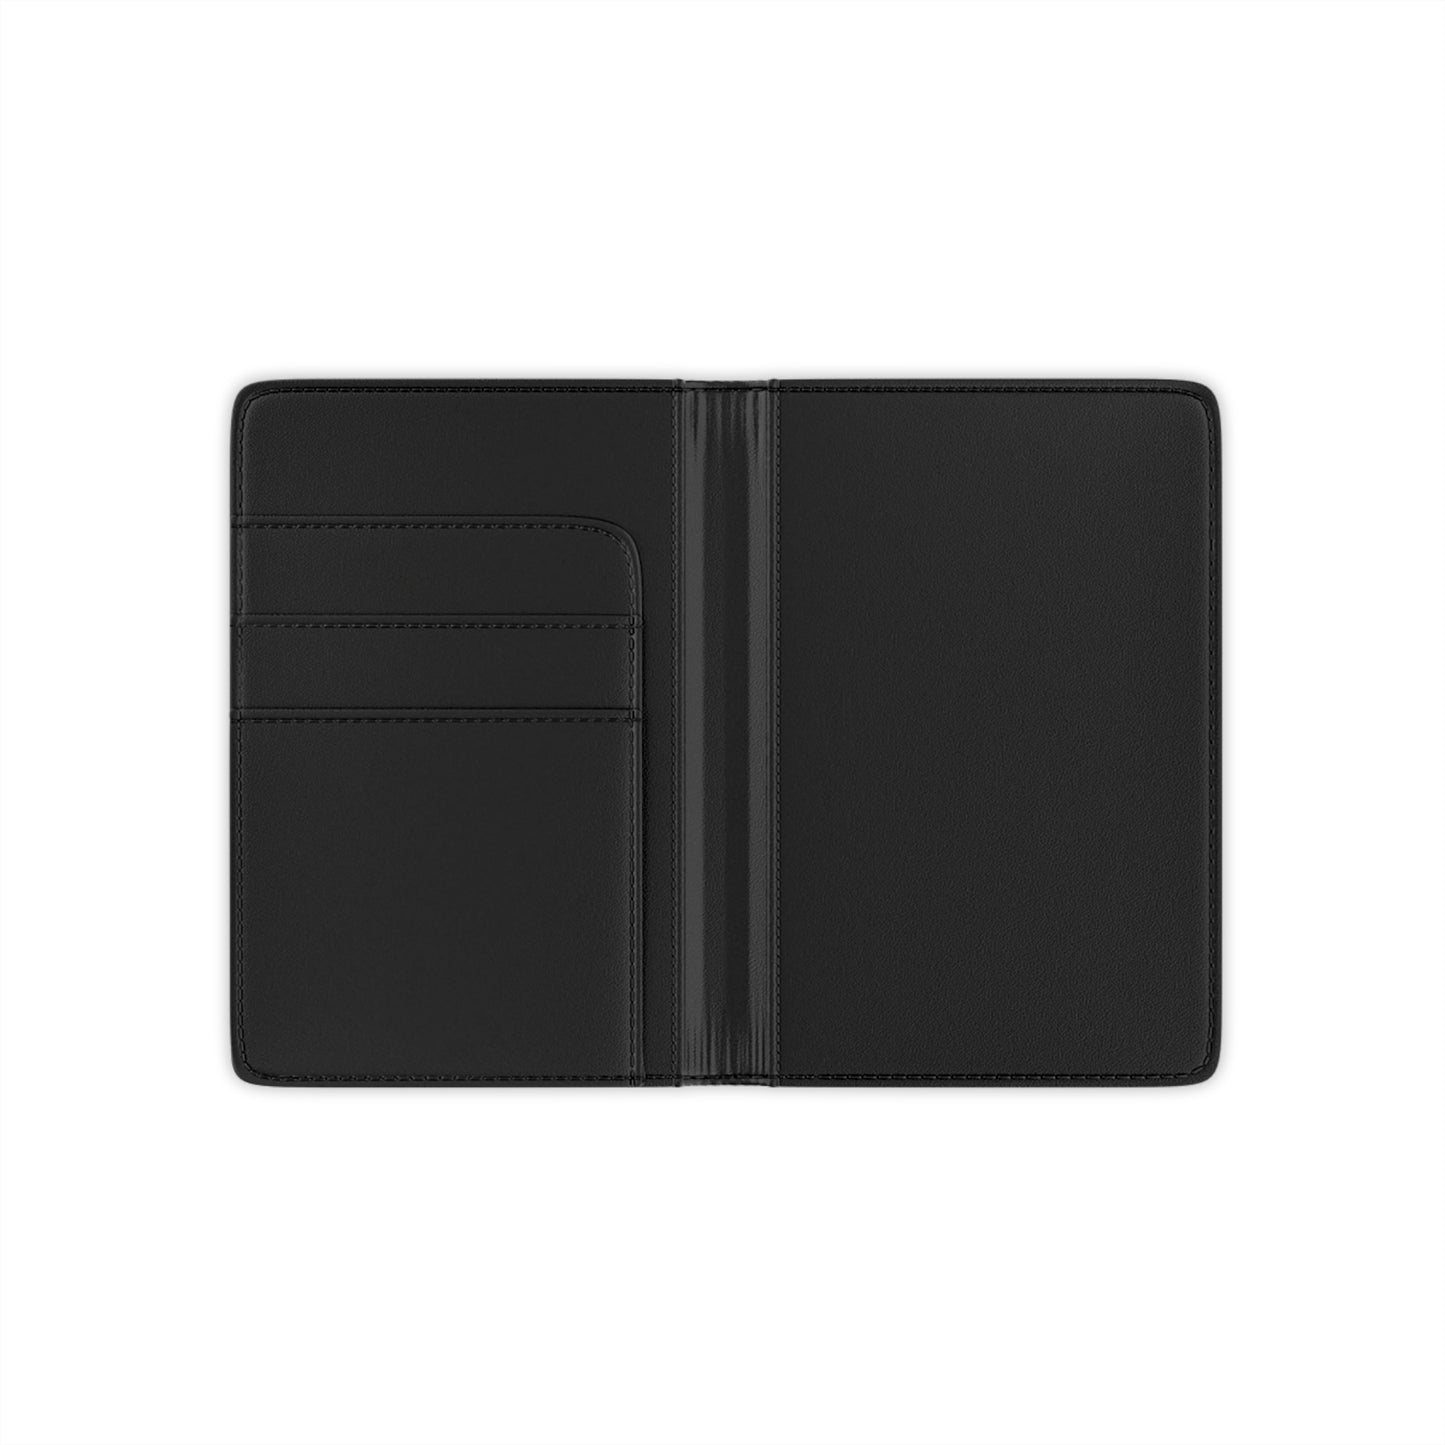 Passport Cover: BALEIJO Coiffure Collection 02